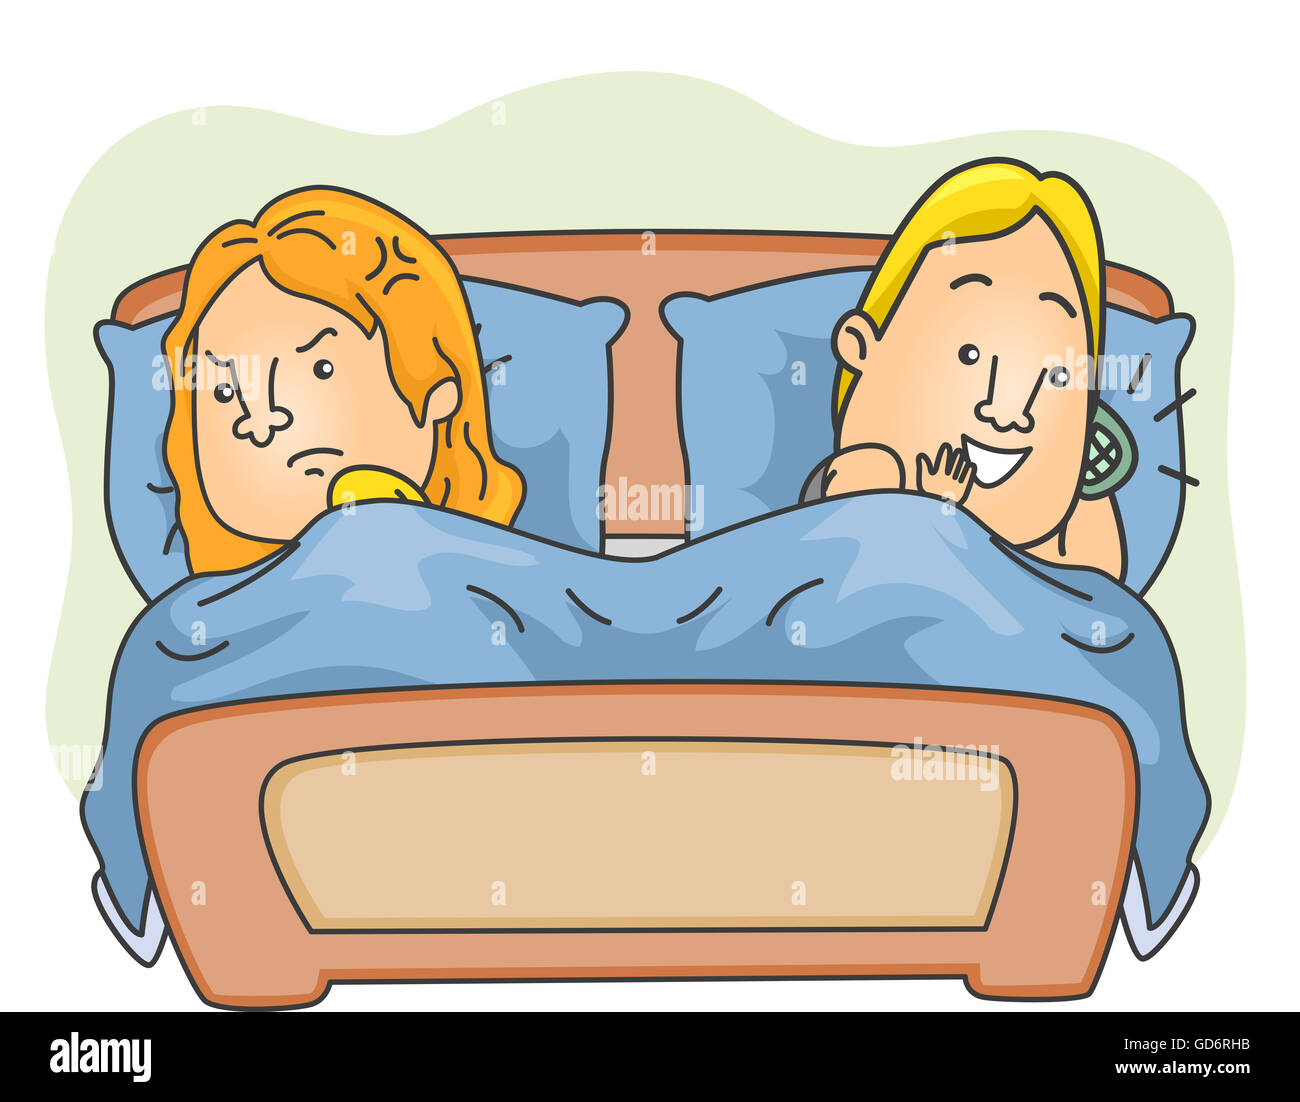 Illustration of a Wife Suspecting Her Husband of Having an Affair Stock Photo